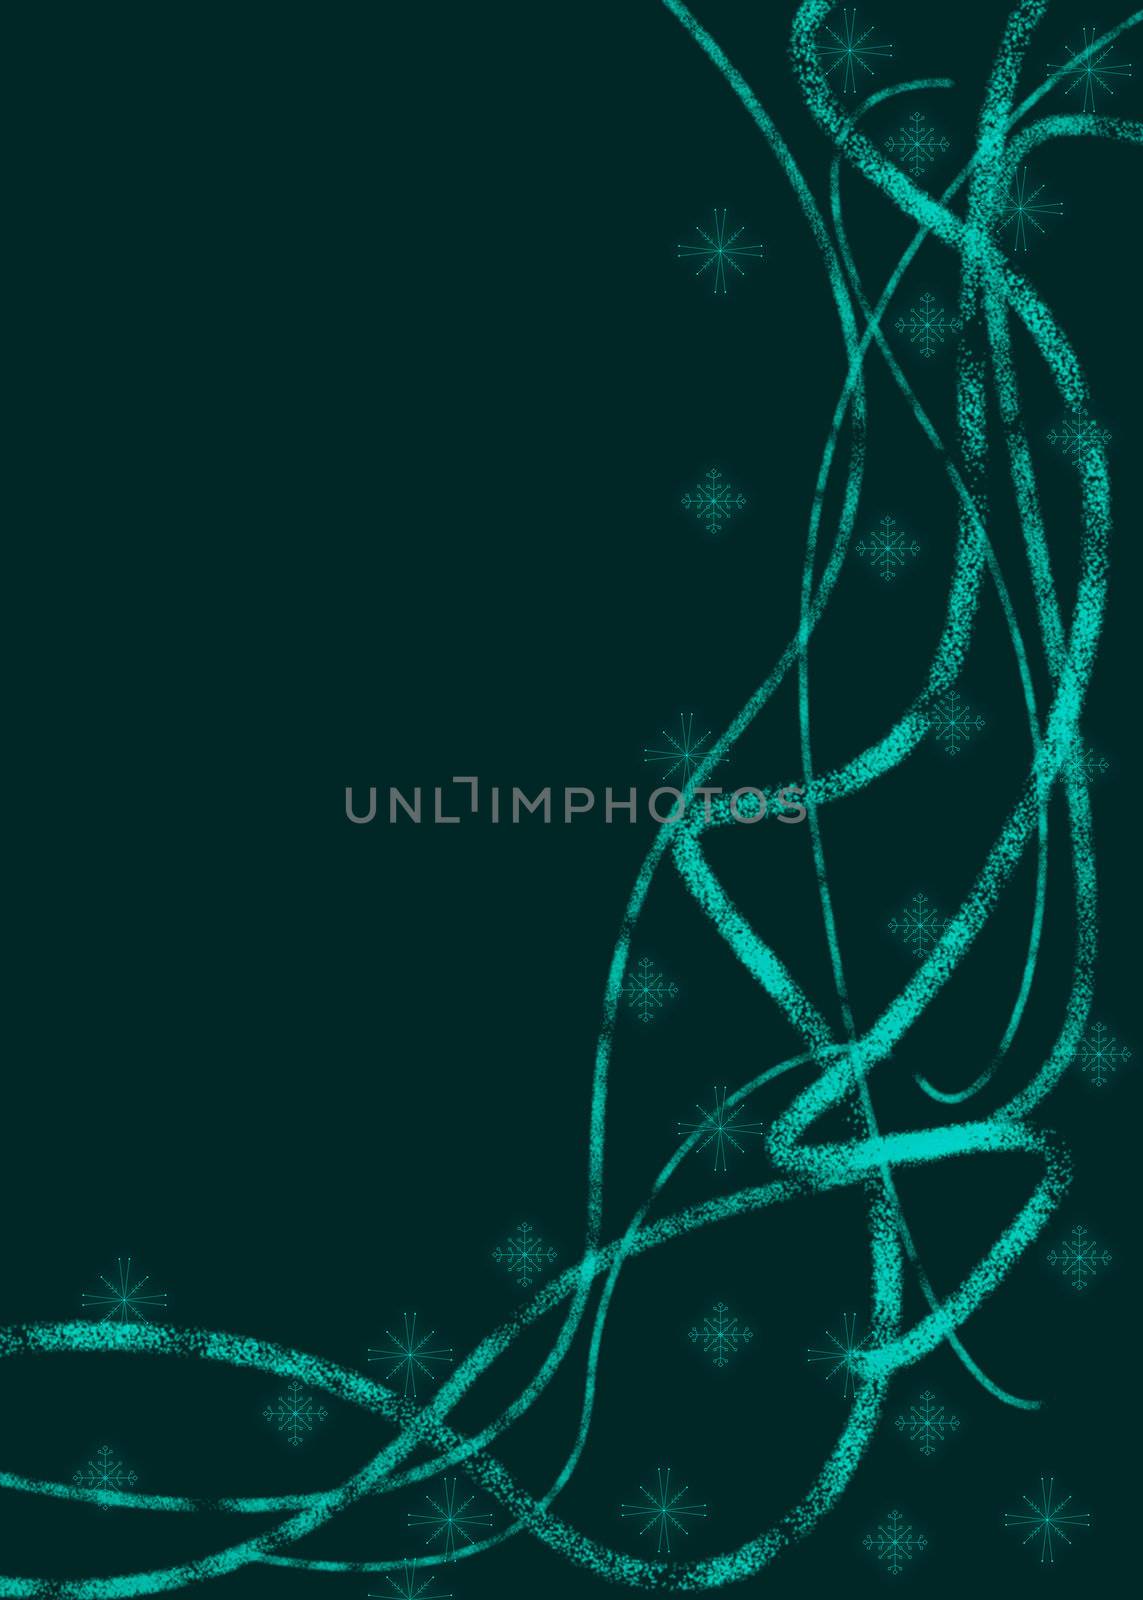 Blue winter background for Christmas with glowing snowflakes and abstract lines